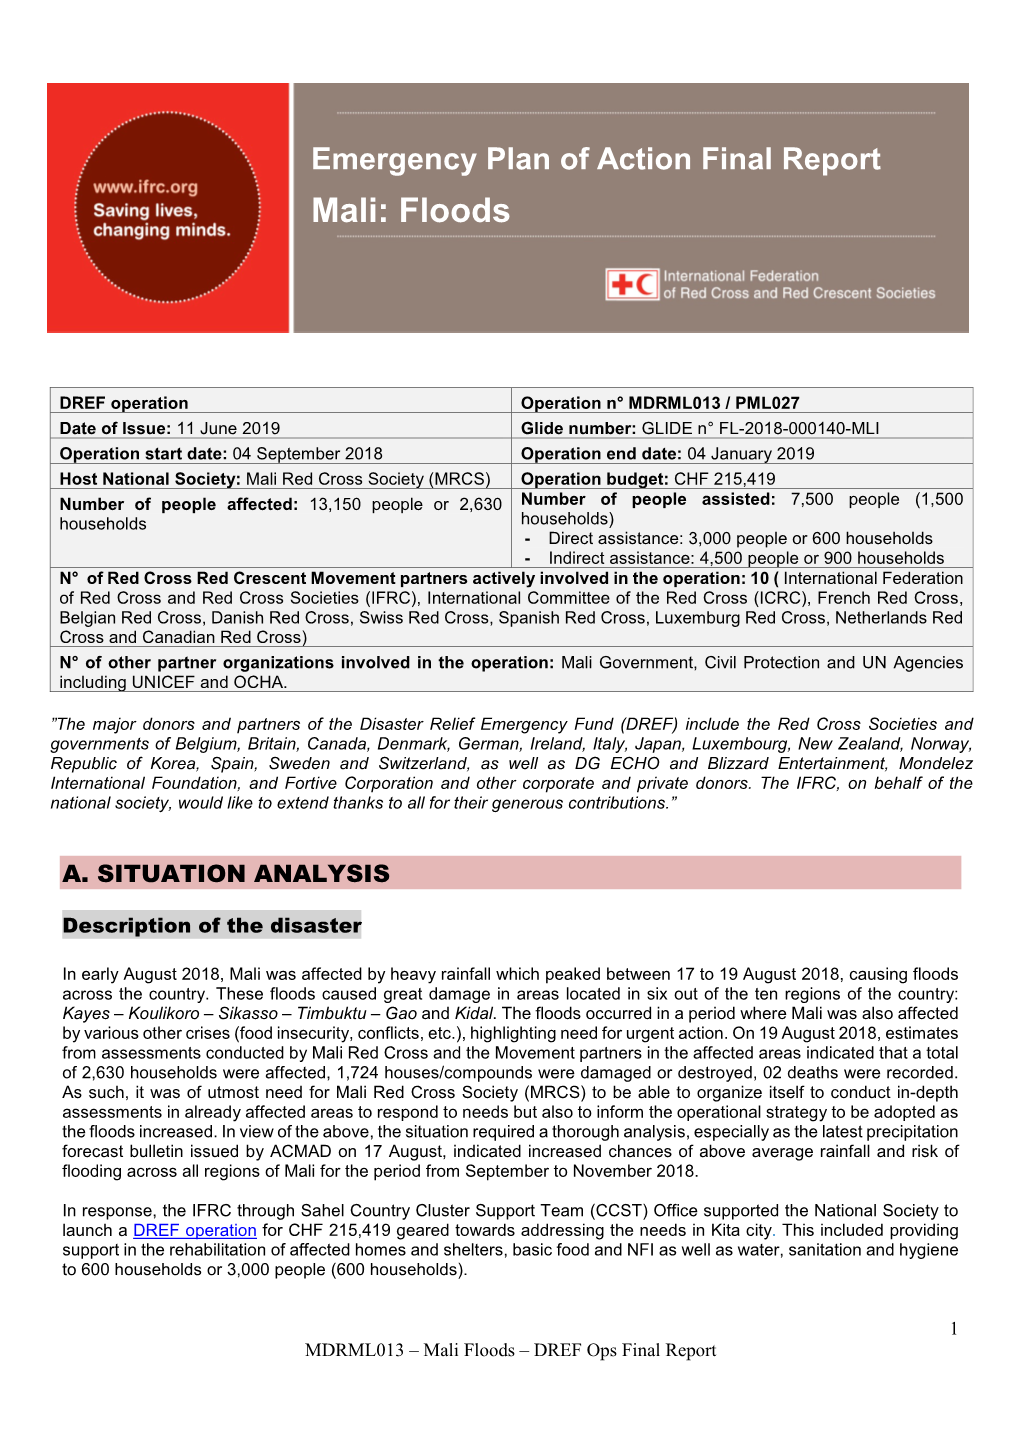 Emergency Plan of Action Final Report Mali: Floods